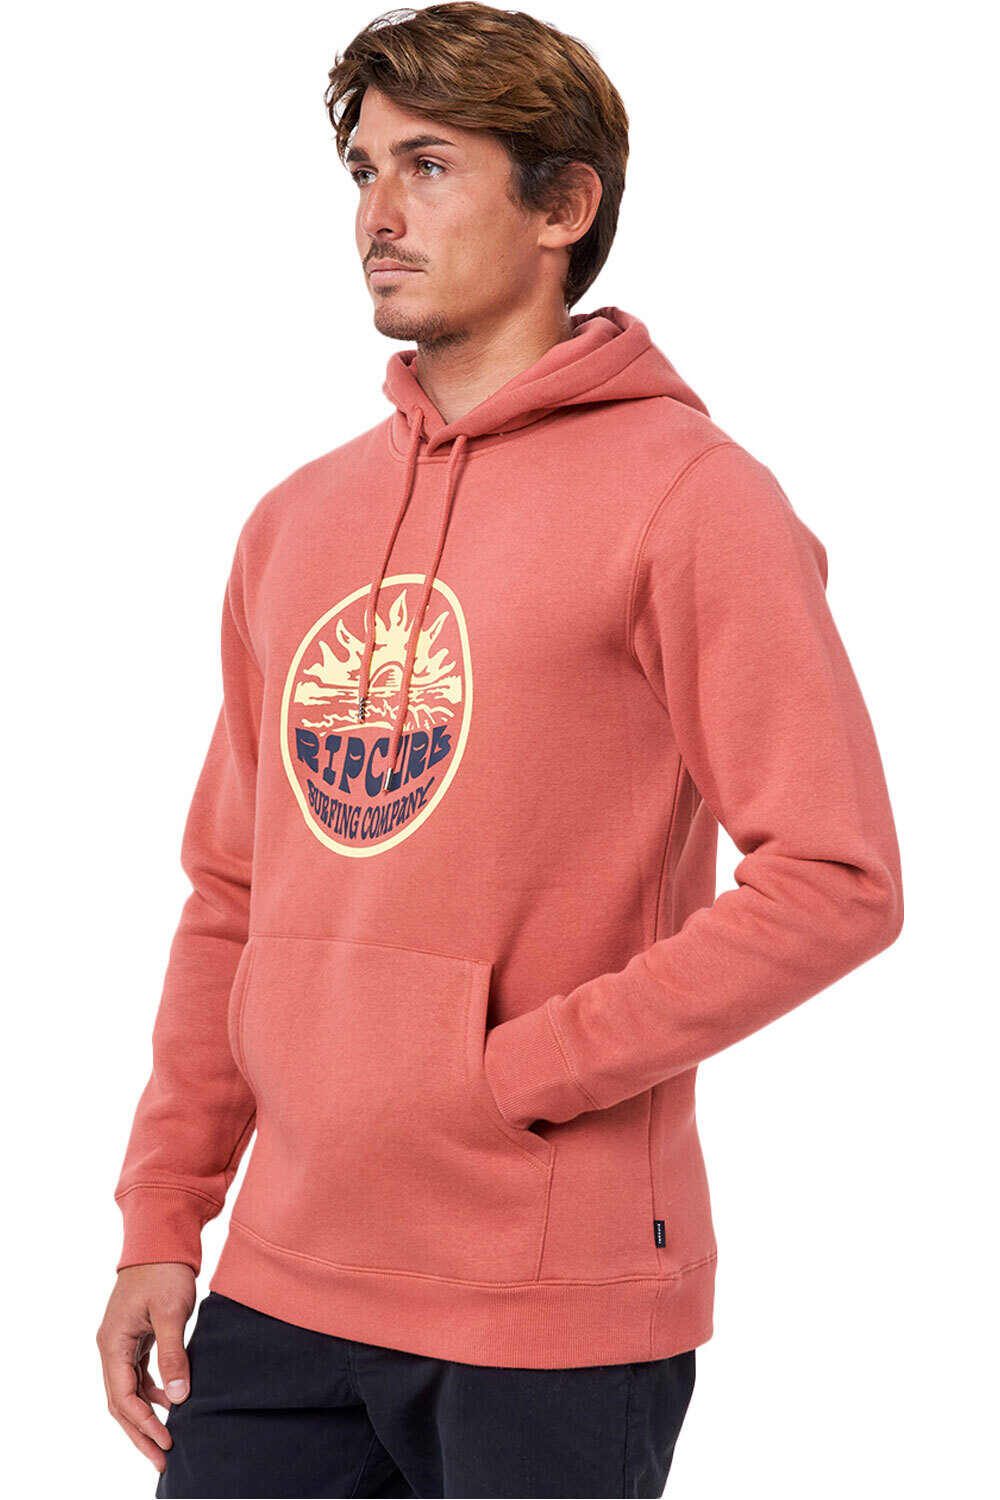 Rip Curl sudadera hombre DOWN THE LINE FP HOODED vista trasera